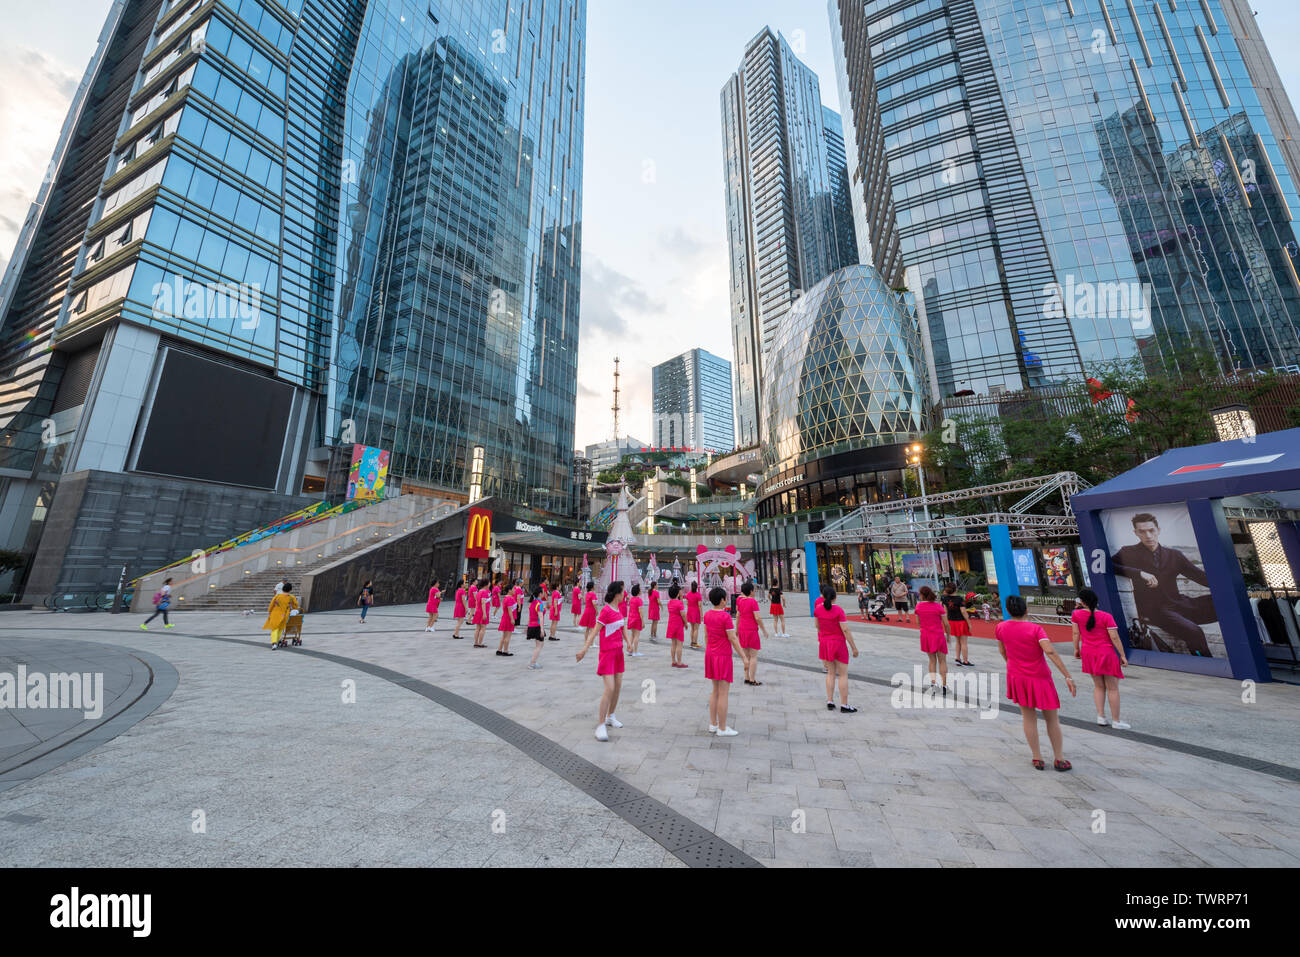 Chengdu, Sichuan province, China - June 6, 2019 : Senior women with red outfit practising square dancing in front of Evergrande plaza commercial mall Stock Photo